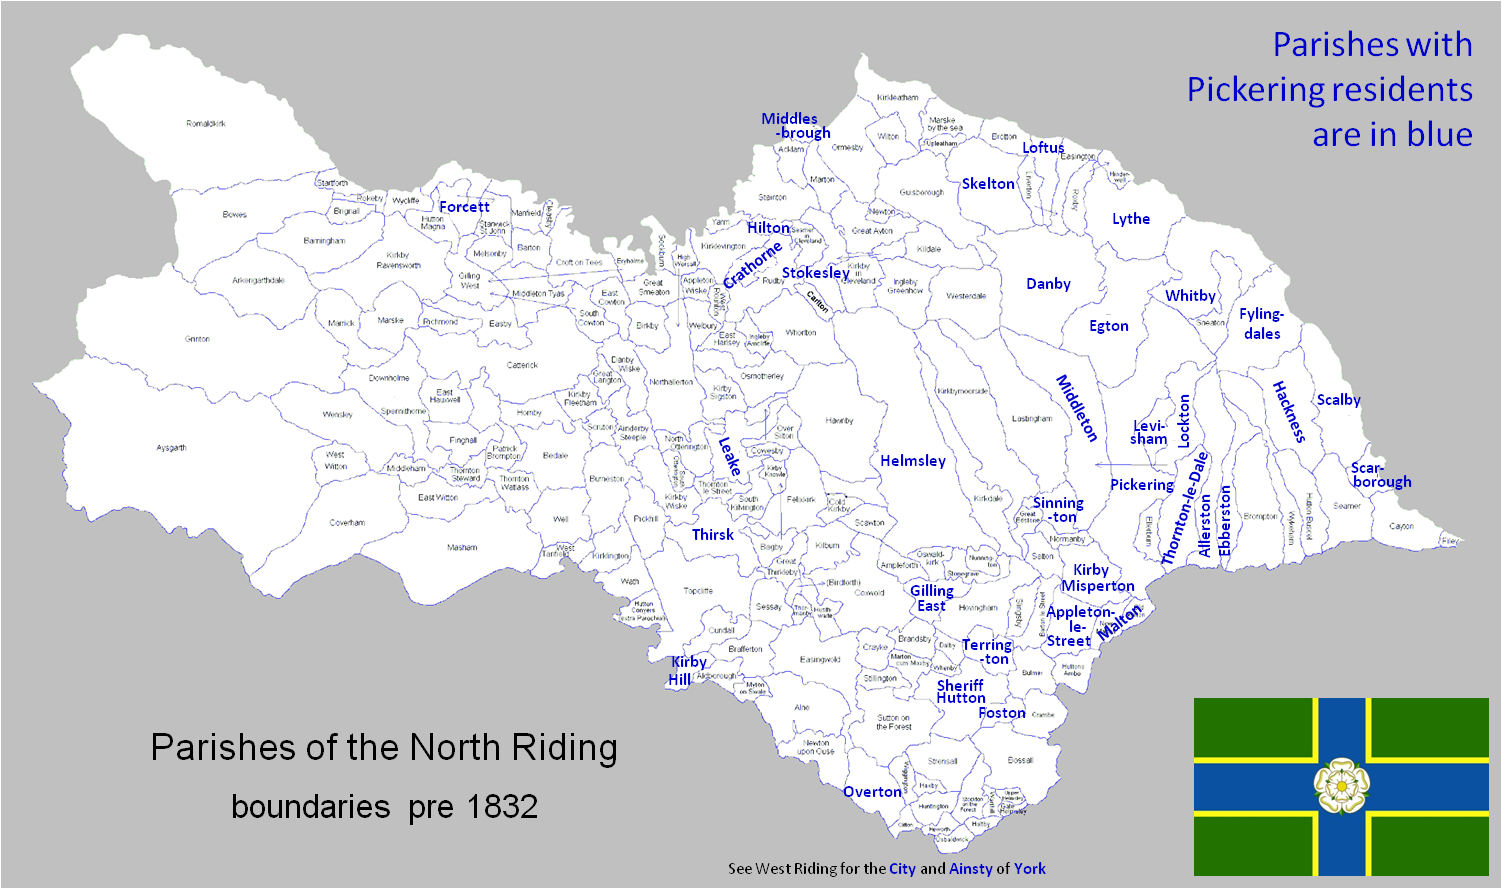 adapted from The Parishes of the North Riding © Colin Hinson